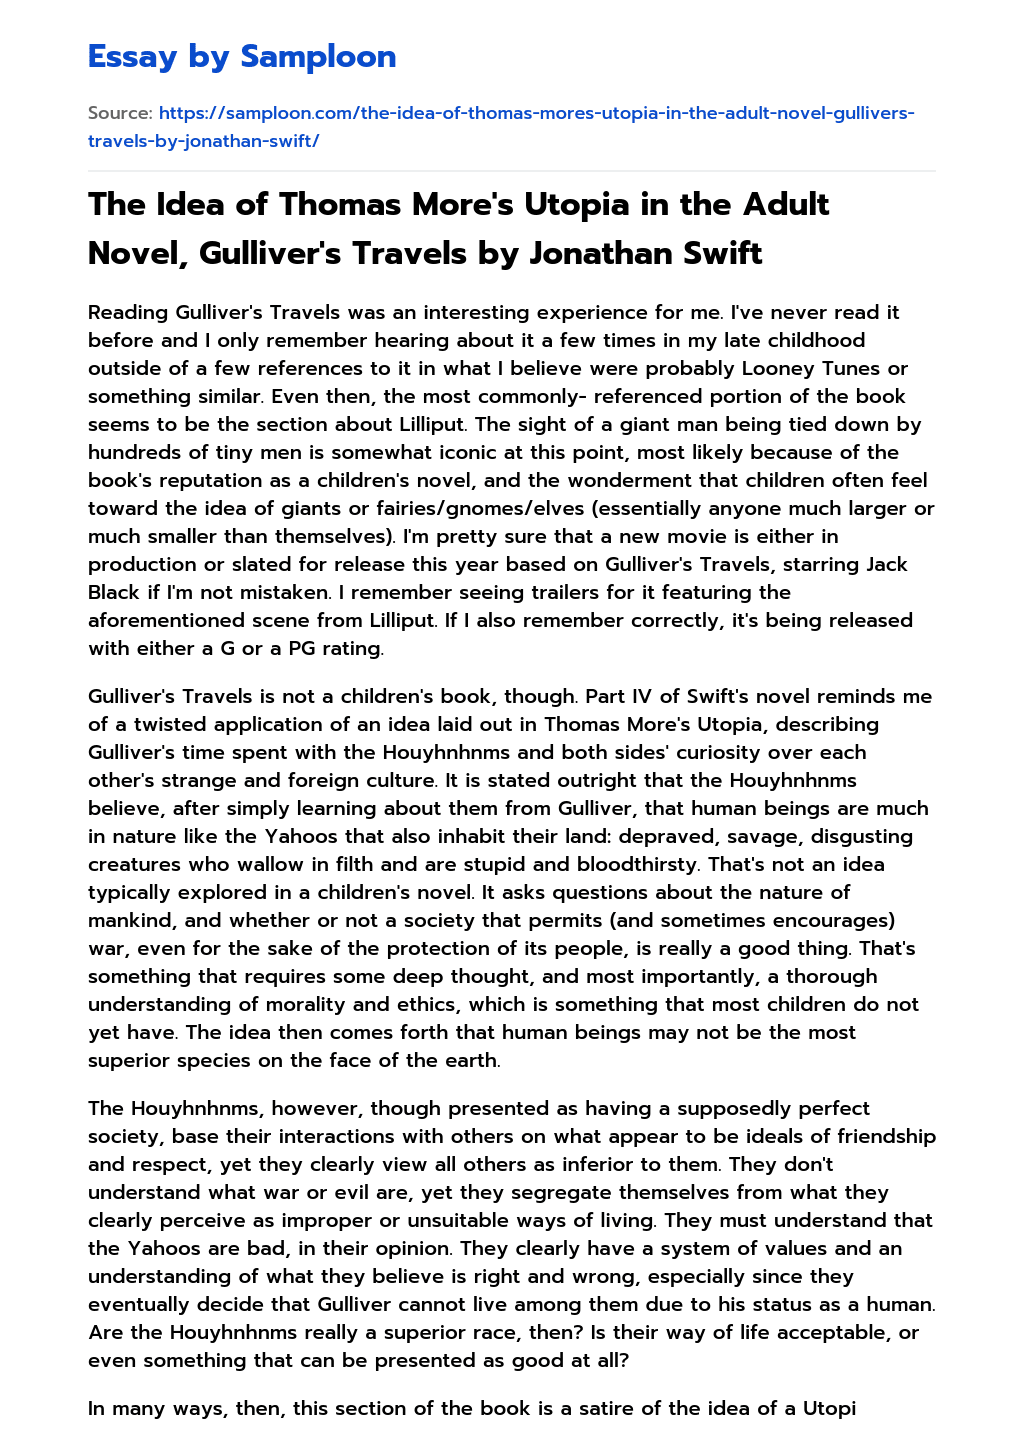 The Idea of Thomas More’s Utopia in the Adult Novel, Gulliver’s Travels by Jonathan Swift essay